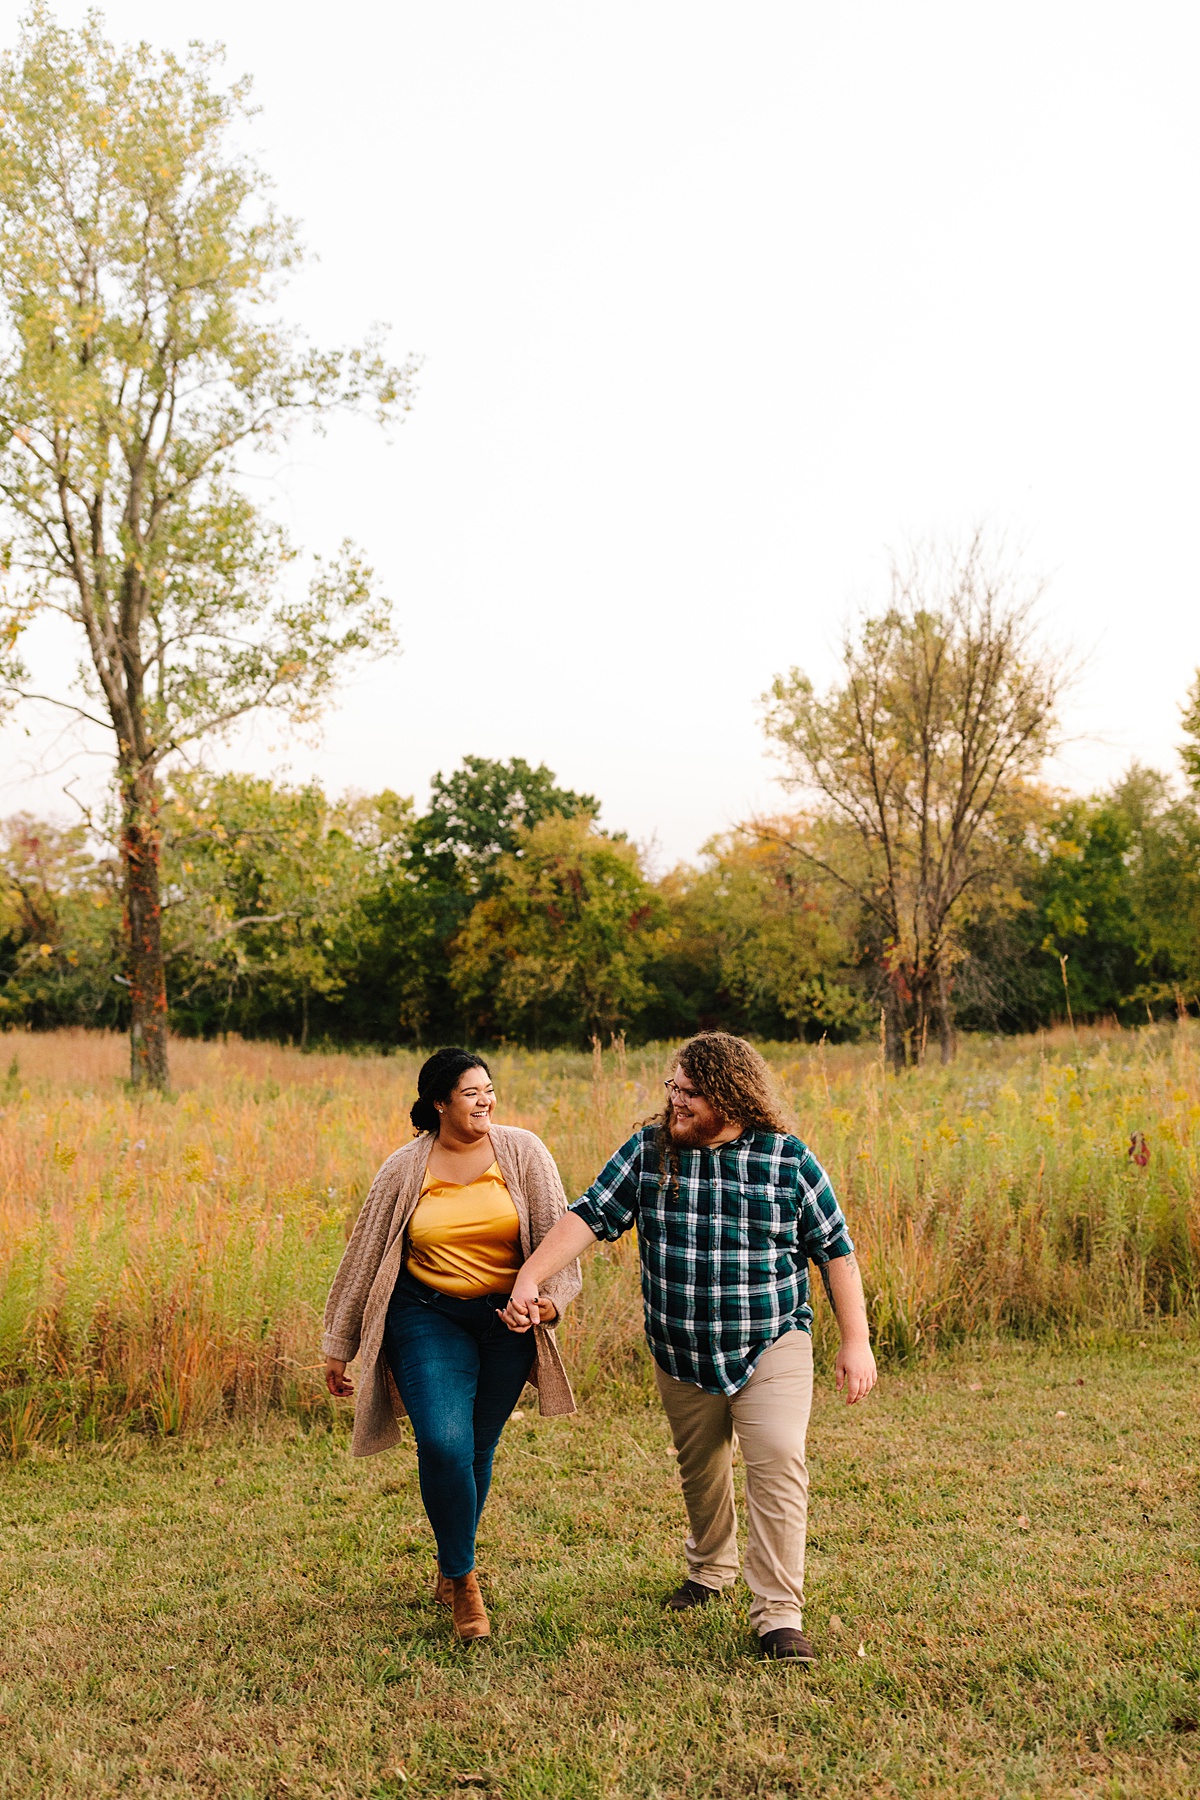 Shawnee Mission Park, Fall engagement session, fall photos, shawnee mission park photographer, kansas city photographer, engagement photographer, engagement photos, couples photos, what to wear for fall photos, fall tones, fall color palette